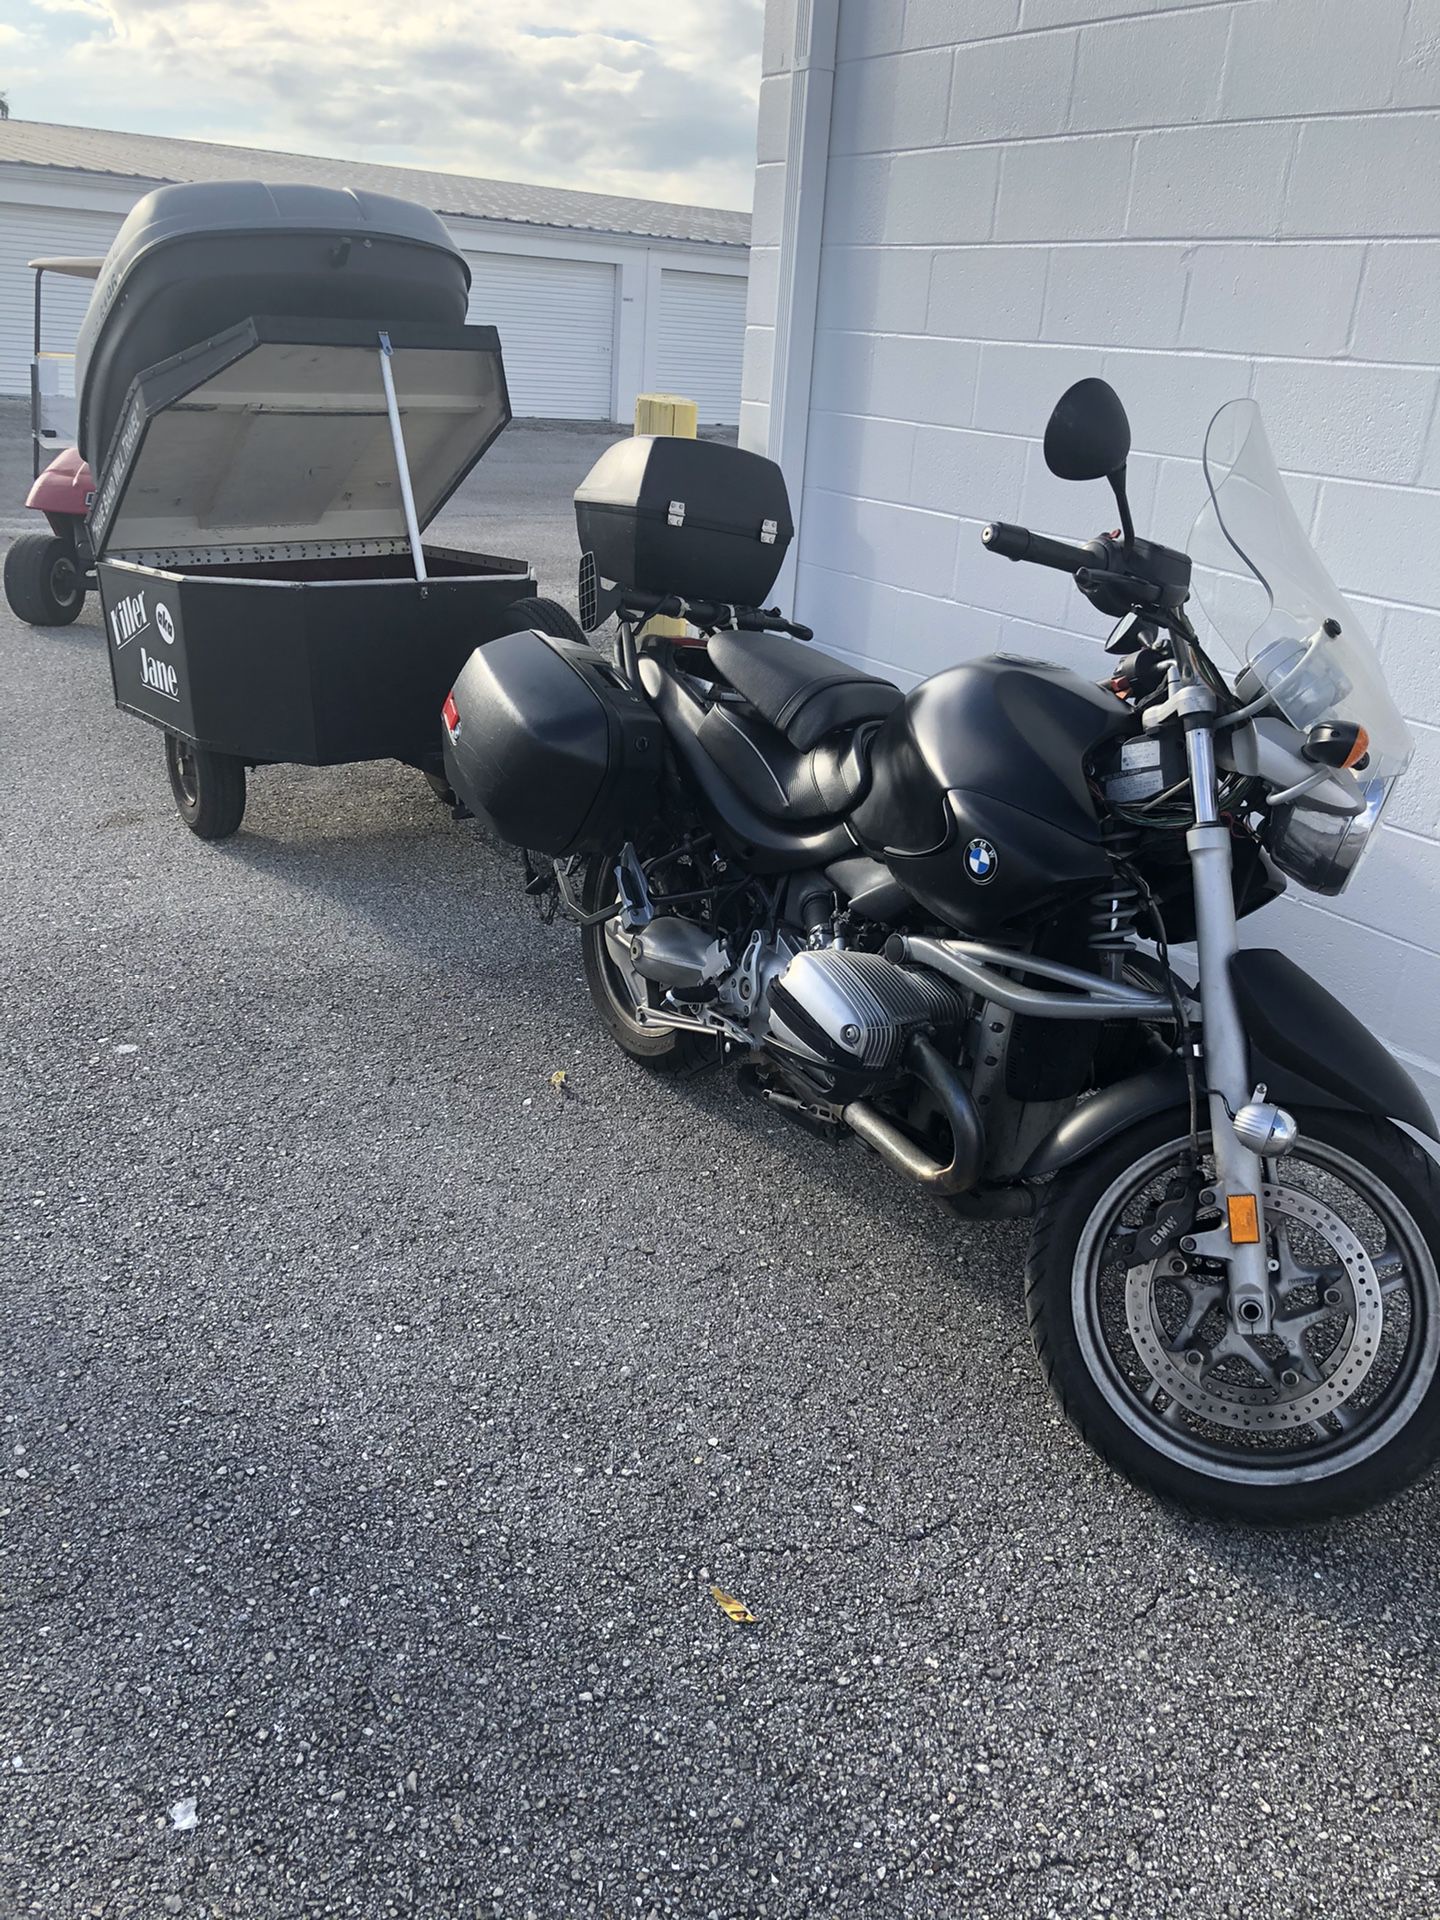 2005 BMW 1150 motorcycle W/ accessories